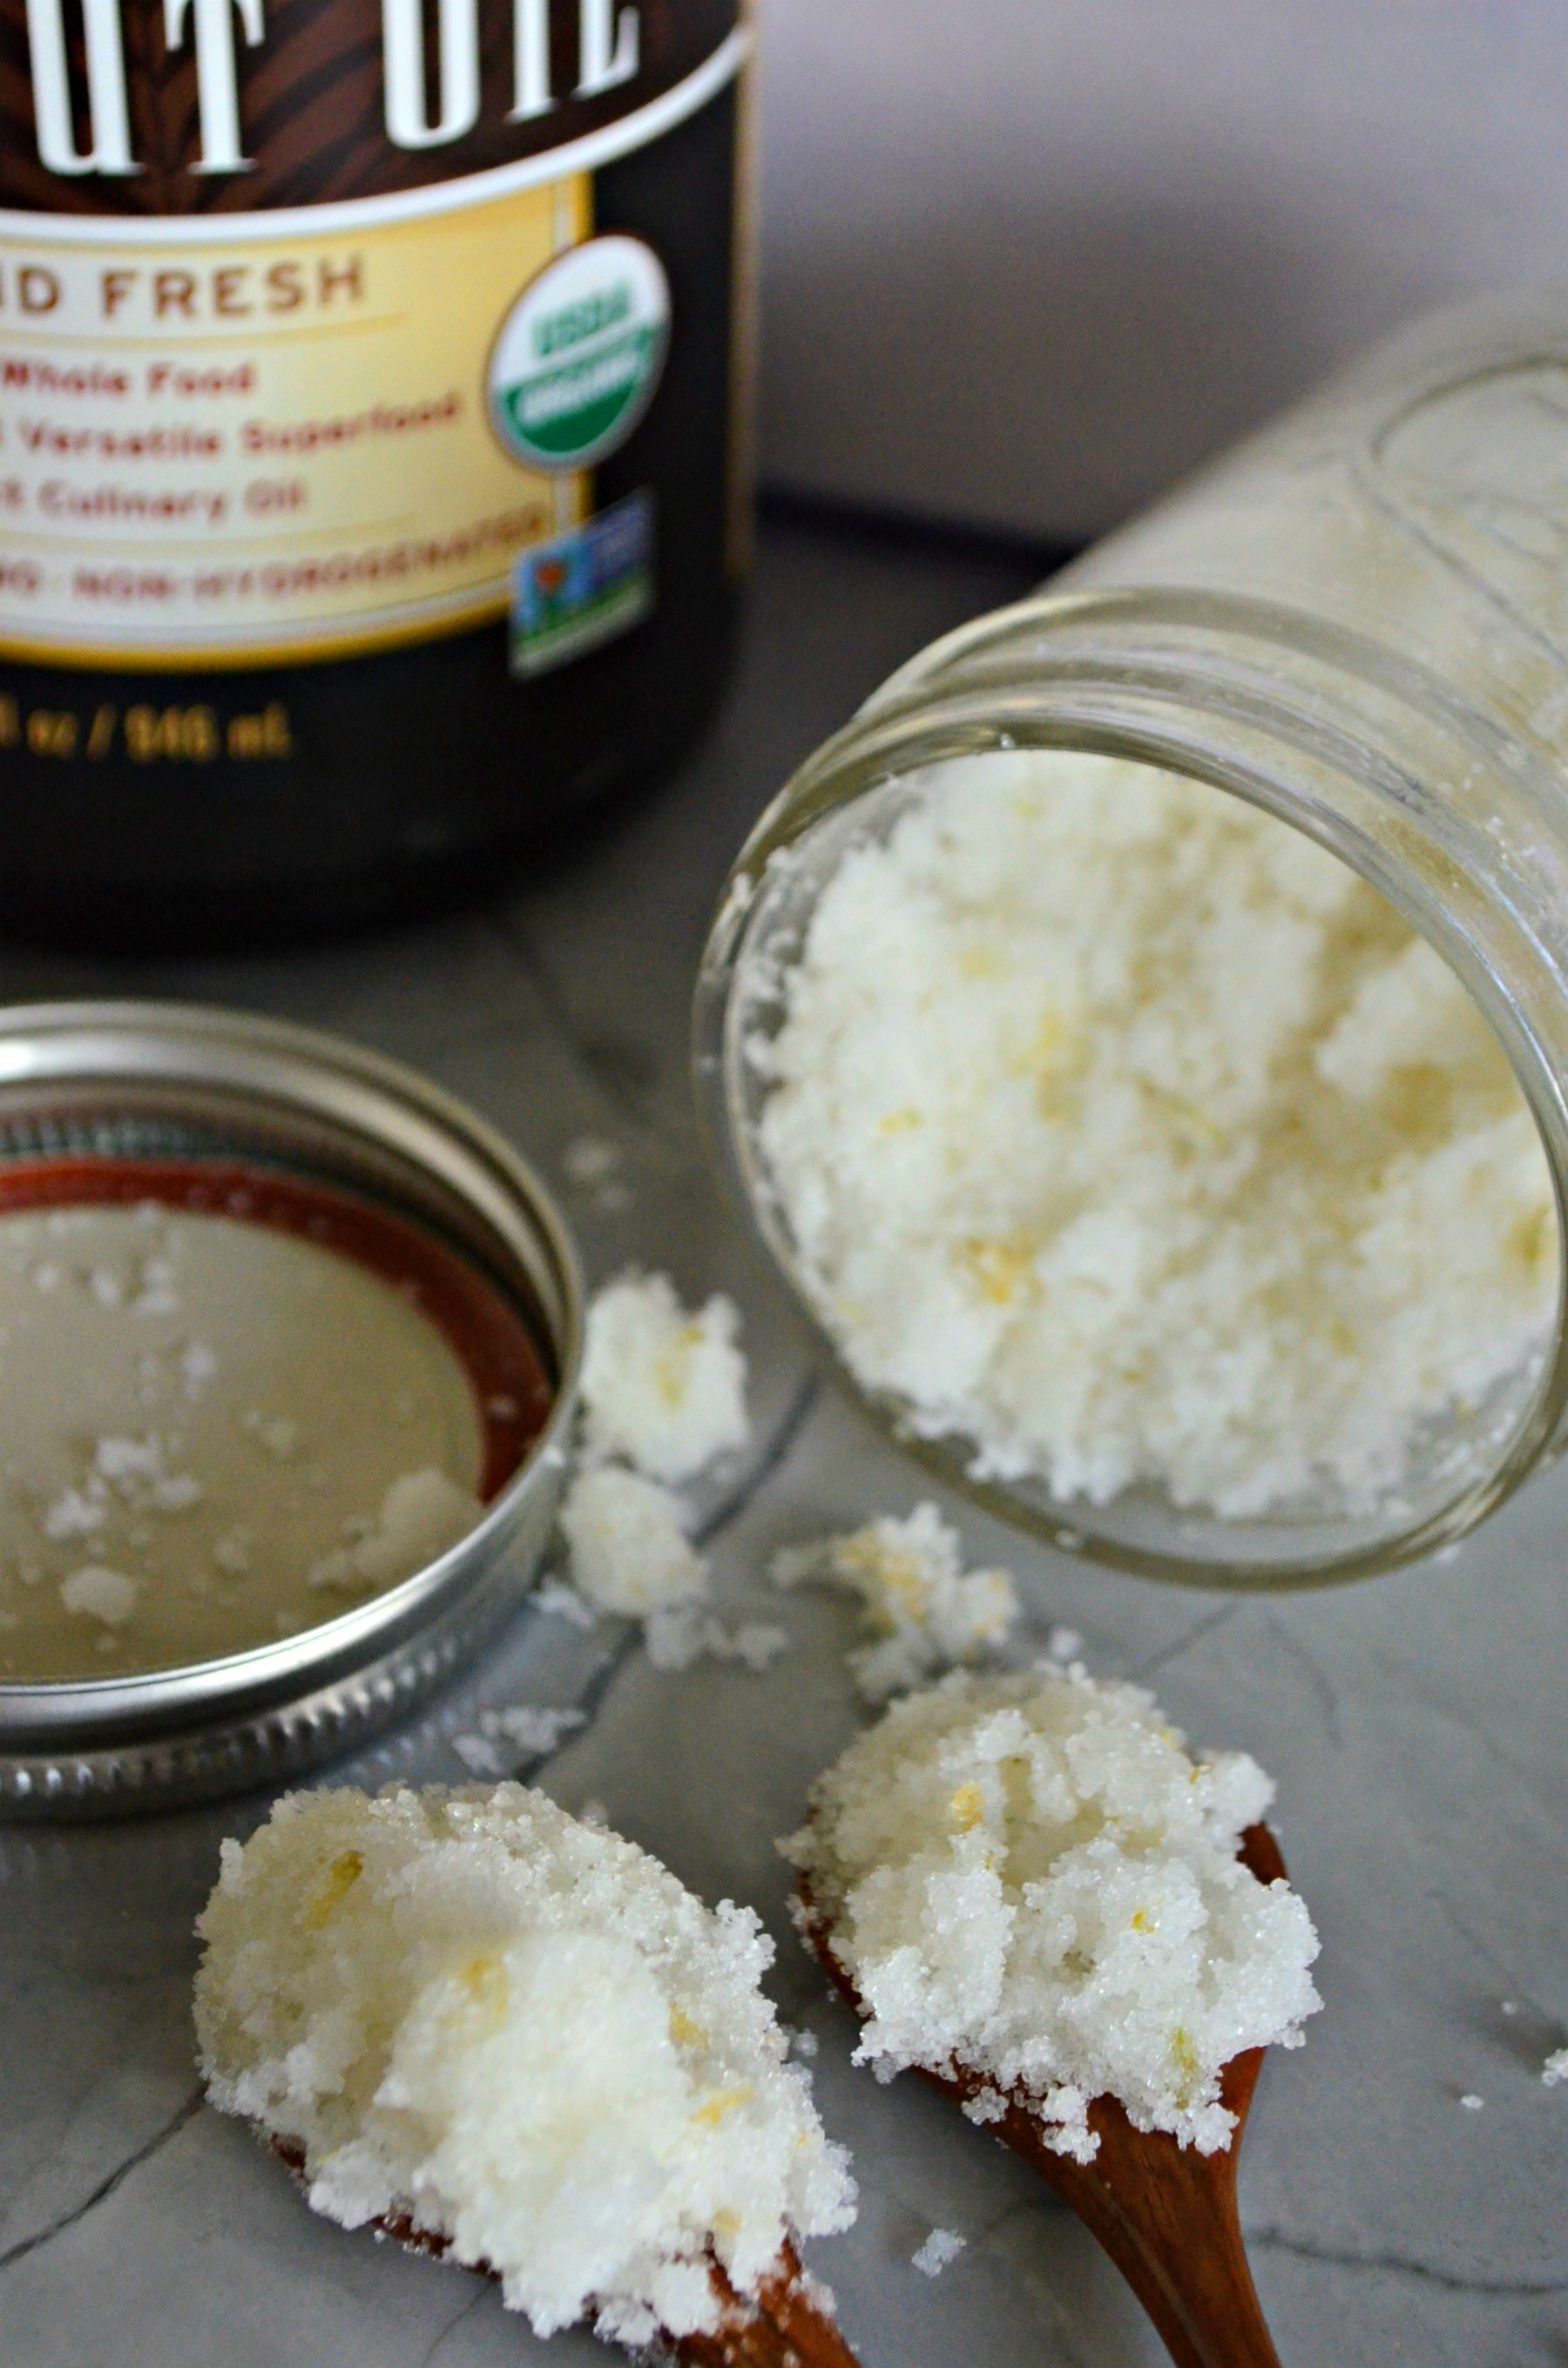 Two wooden spoons with sugar scrub on the spoons on a counter.